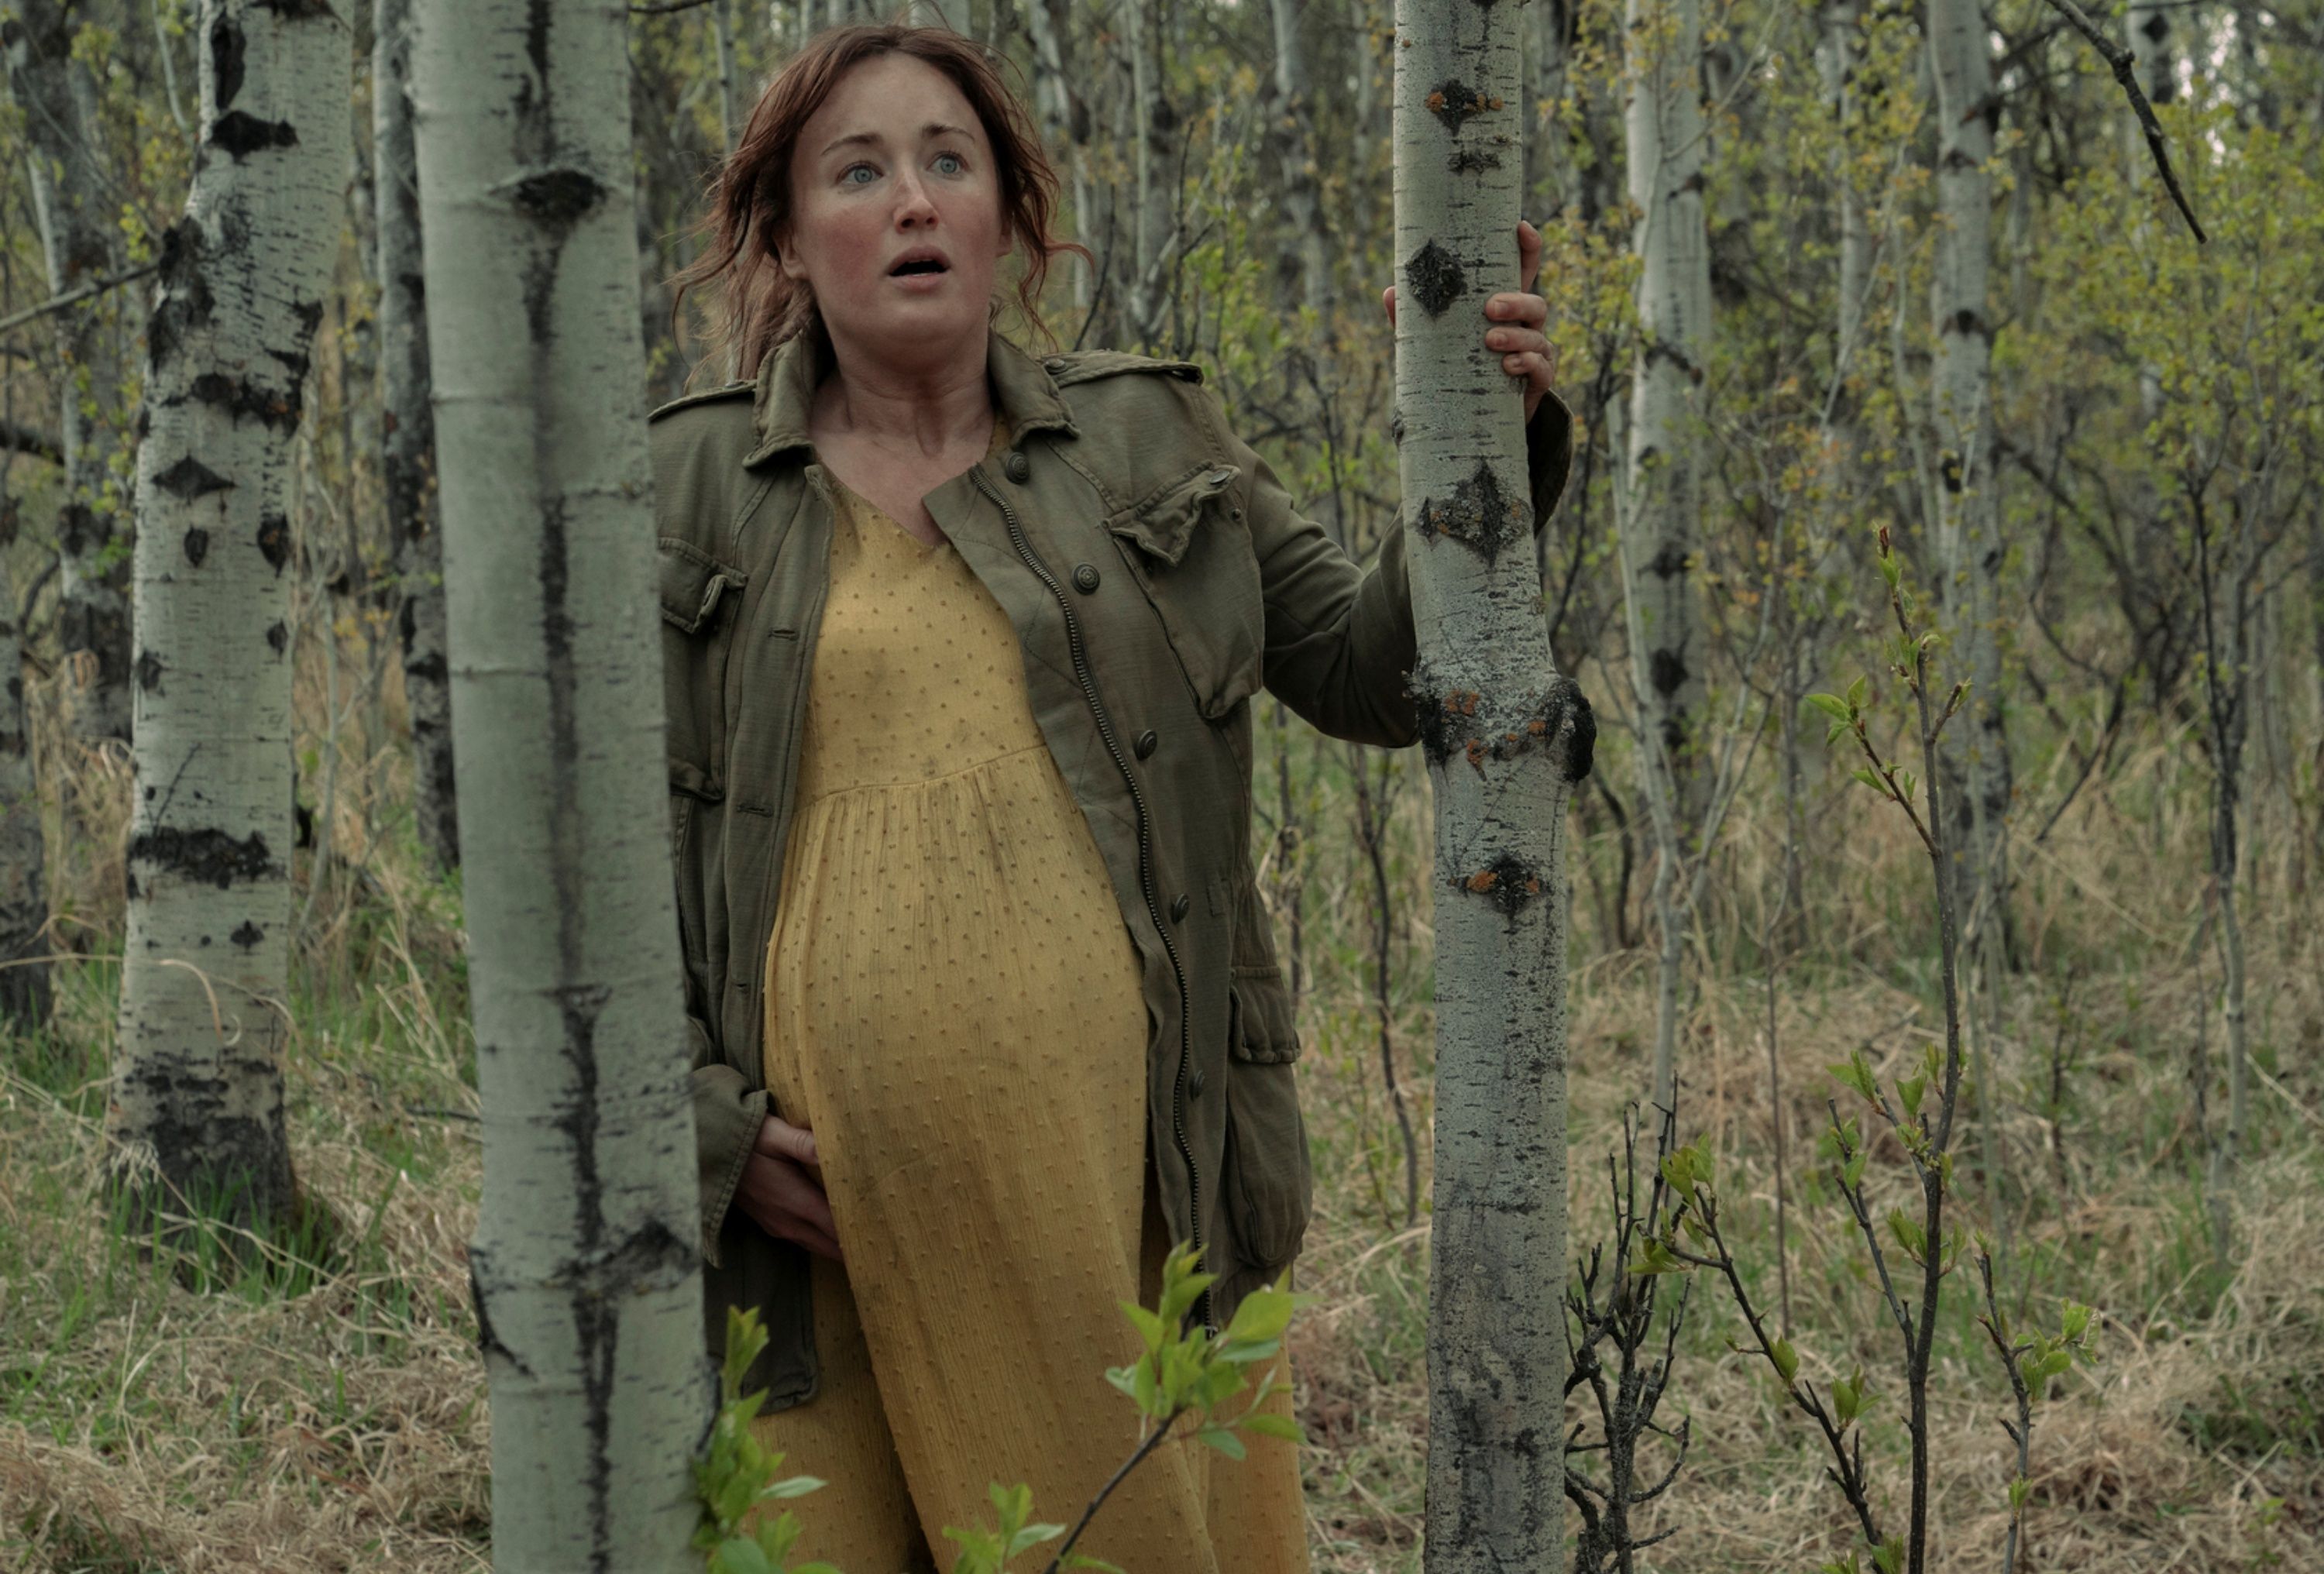 Ashley Johnson as Ellie's mom Anna in Season 1 Episode 9 of The Last of Us